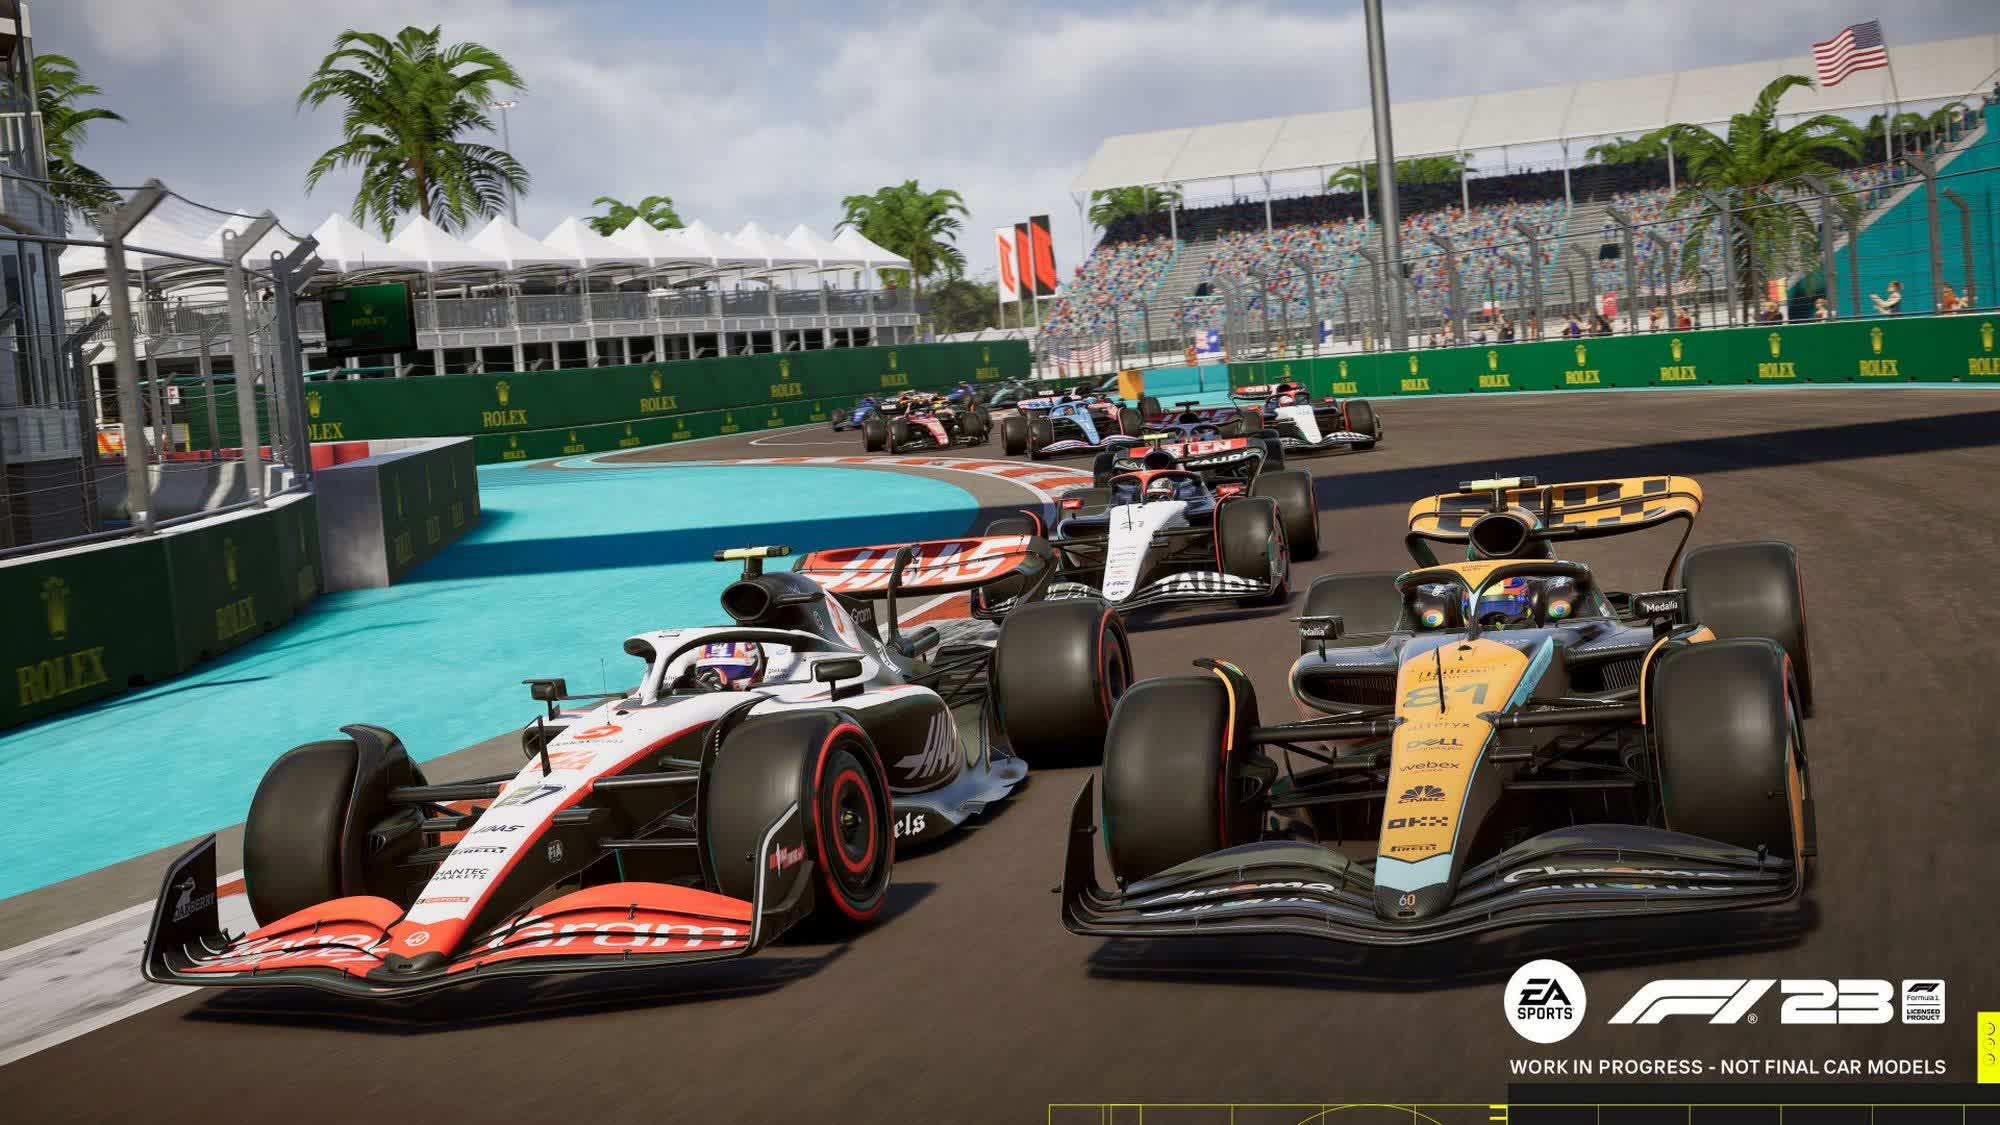 F1 23 launches June 16, here's what you need to run it on your PC